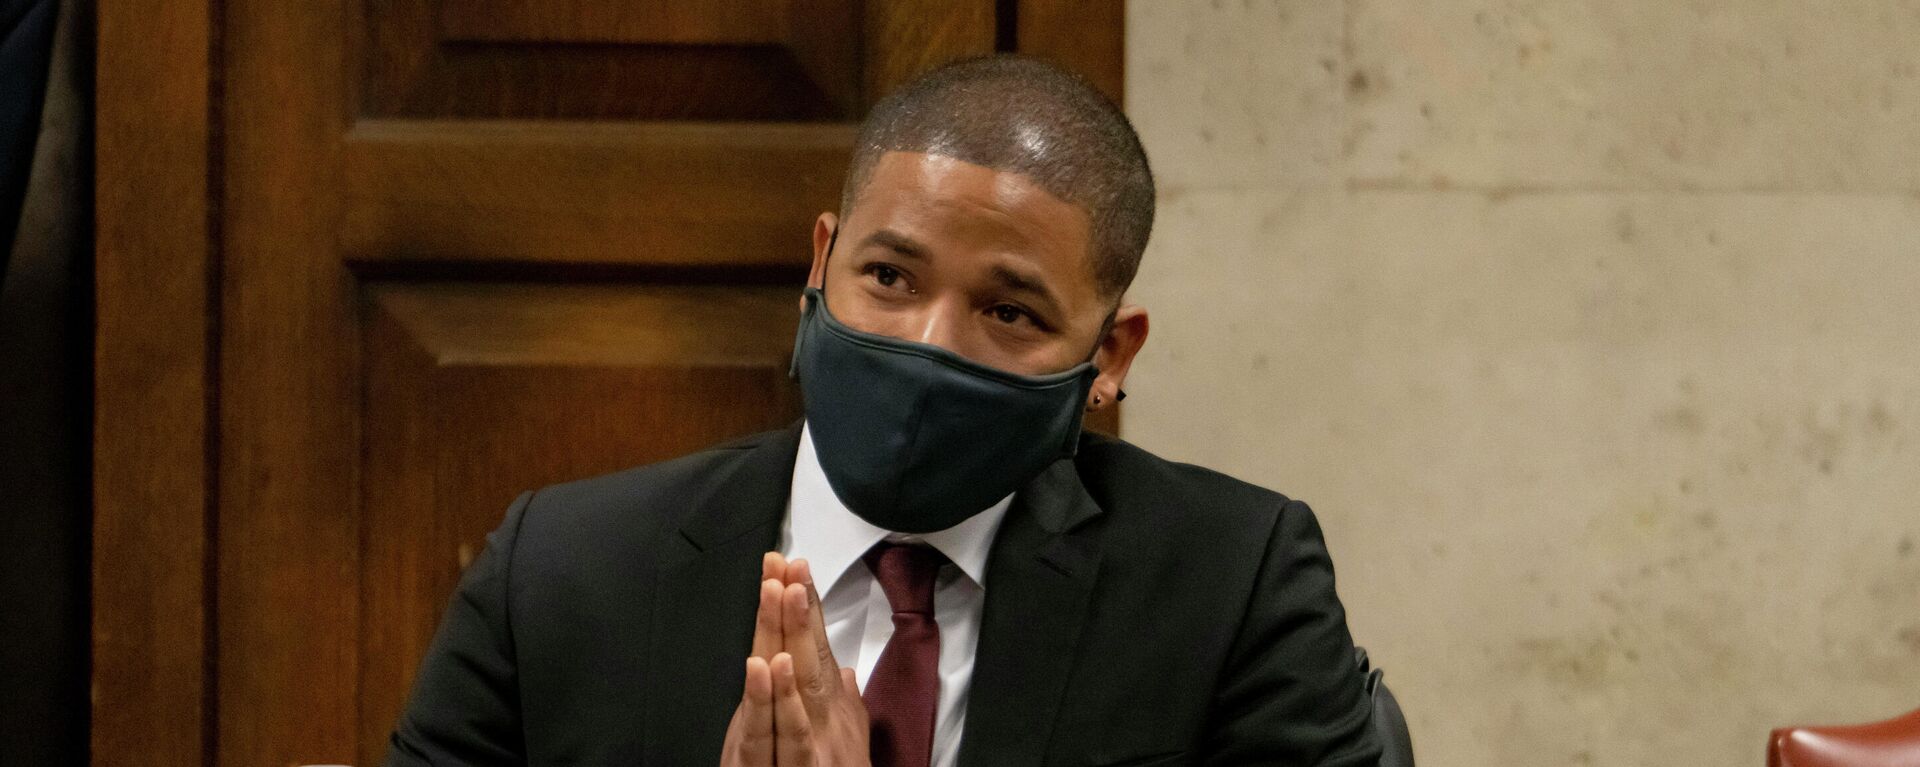 Actor Jussie Smollett listens as his grandmother Molly testifies at his sentencing hearing at the Leighton Criminal Court Building, Thursday, March 10, 2022, in Chicago. - Sputnik International, 1920, 11.03.2022